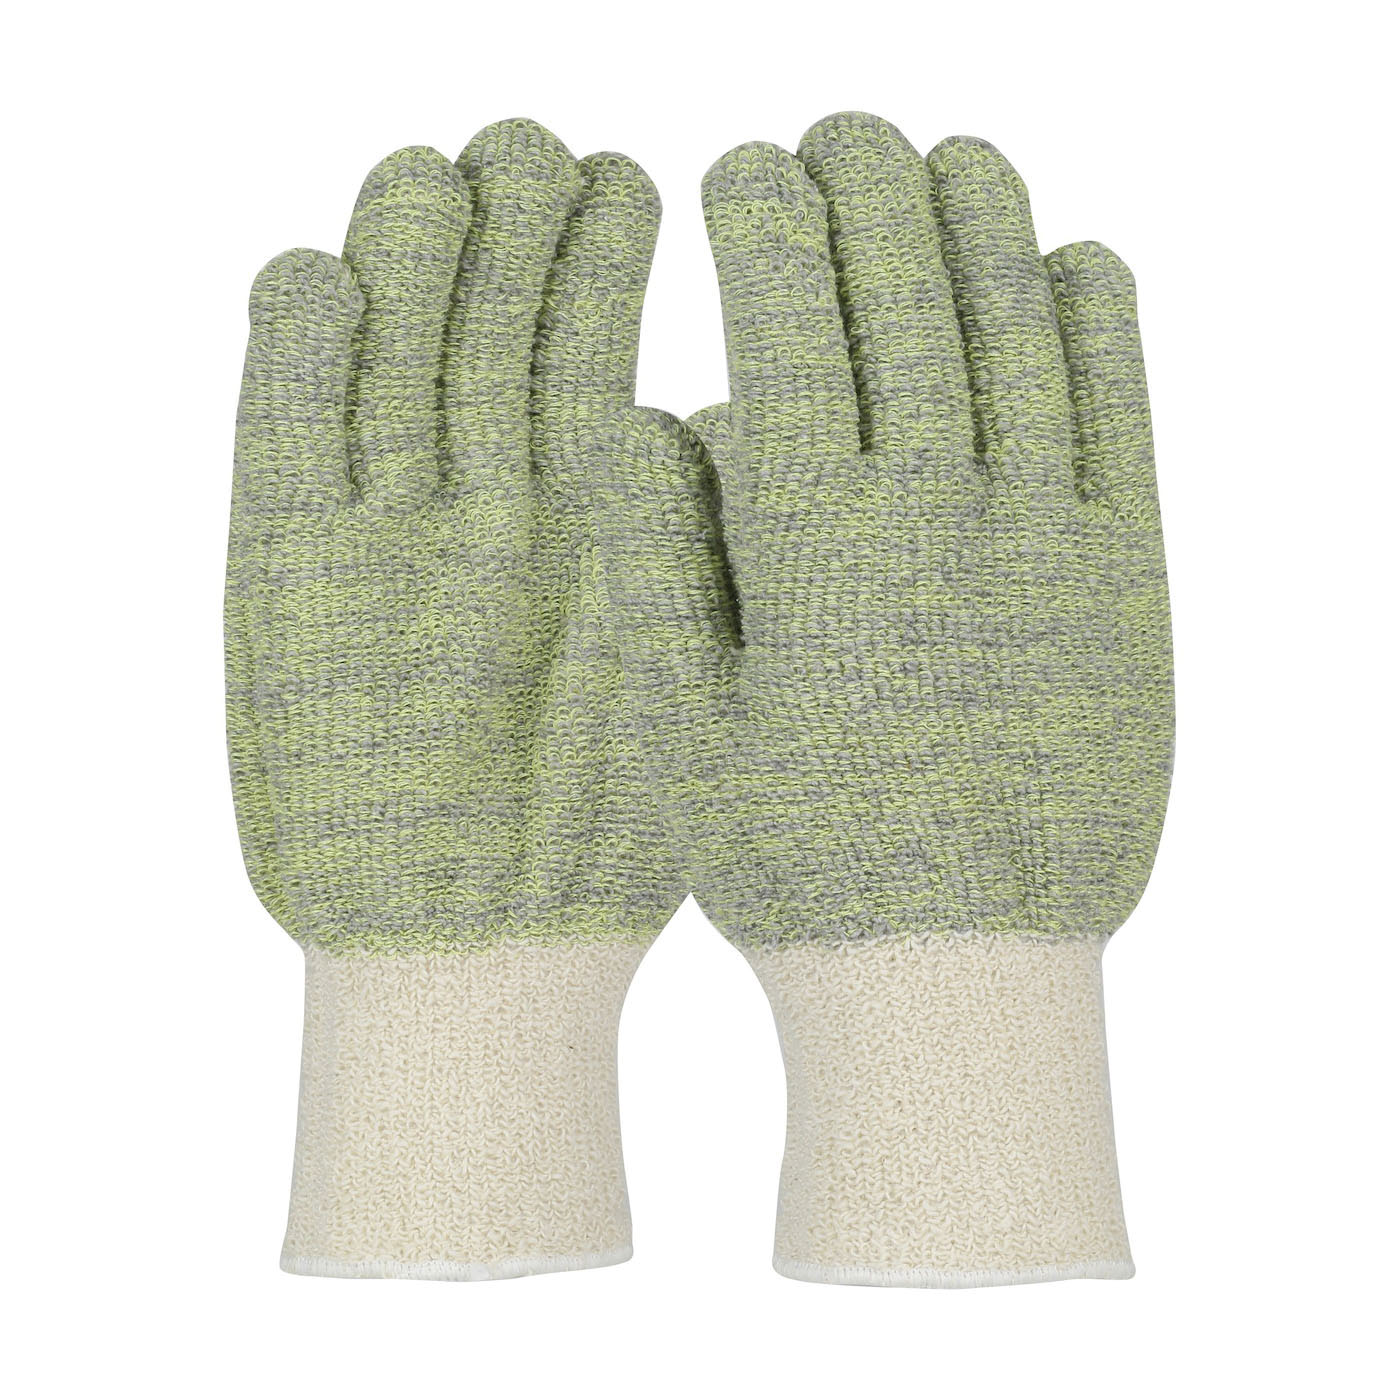 Kut Gard® MATA30BALGY-OERTC-L Blended Cut-Resistant Gloves, L, Uncoated Coating, Knit Wrist Cuff, Resists: Abrasion/Cut, ANSI Cut-Resistance Level: A4